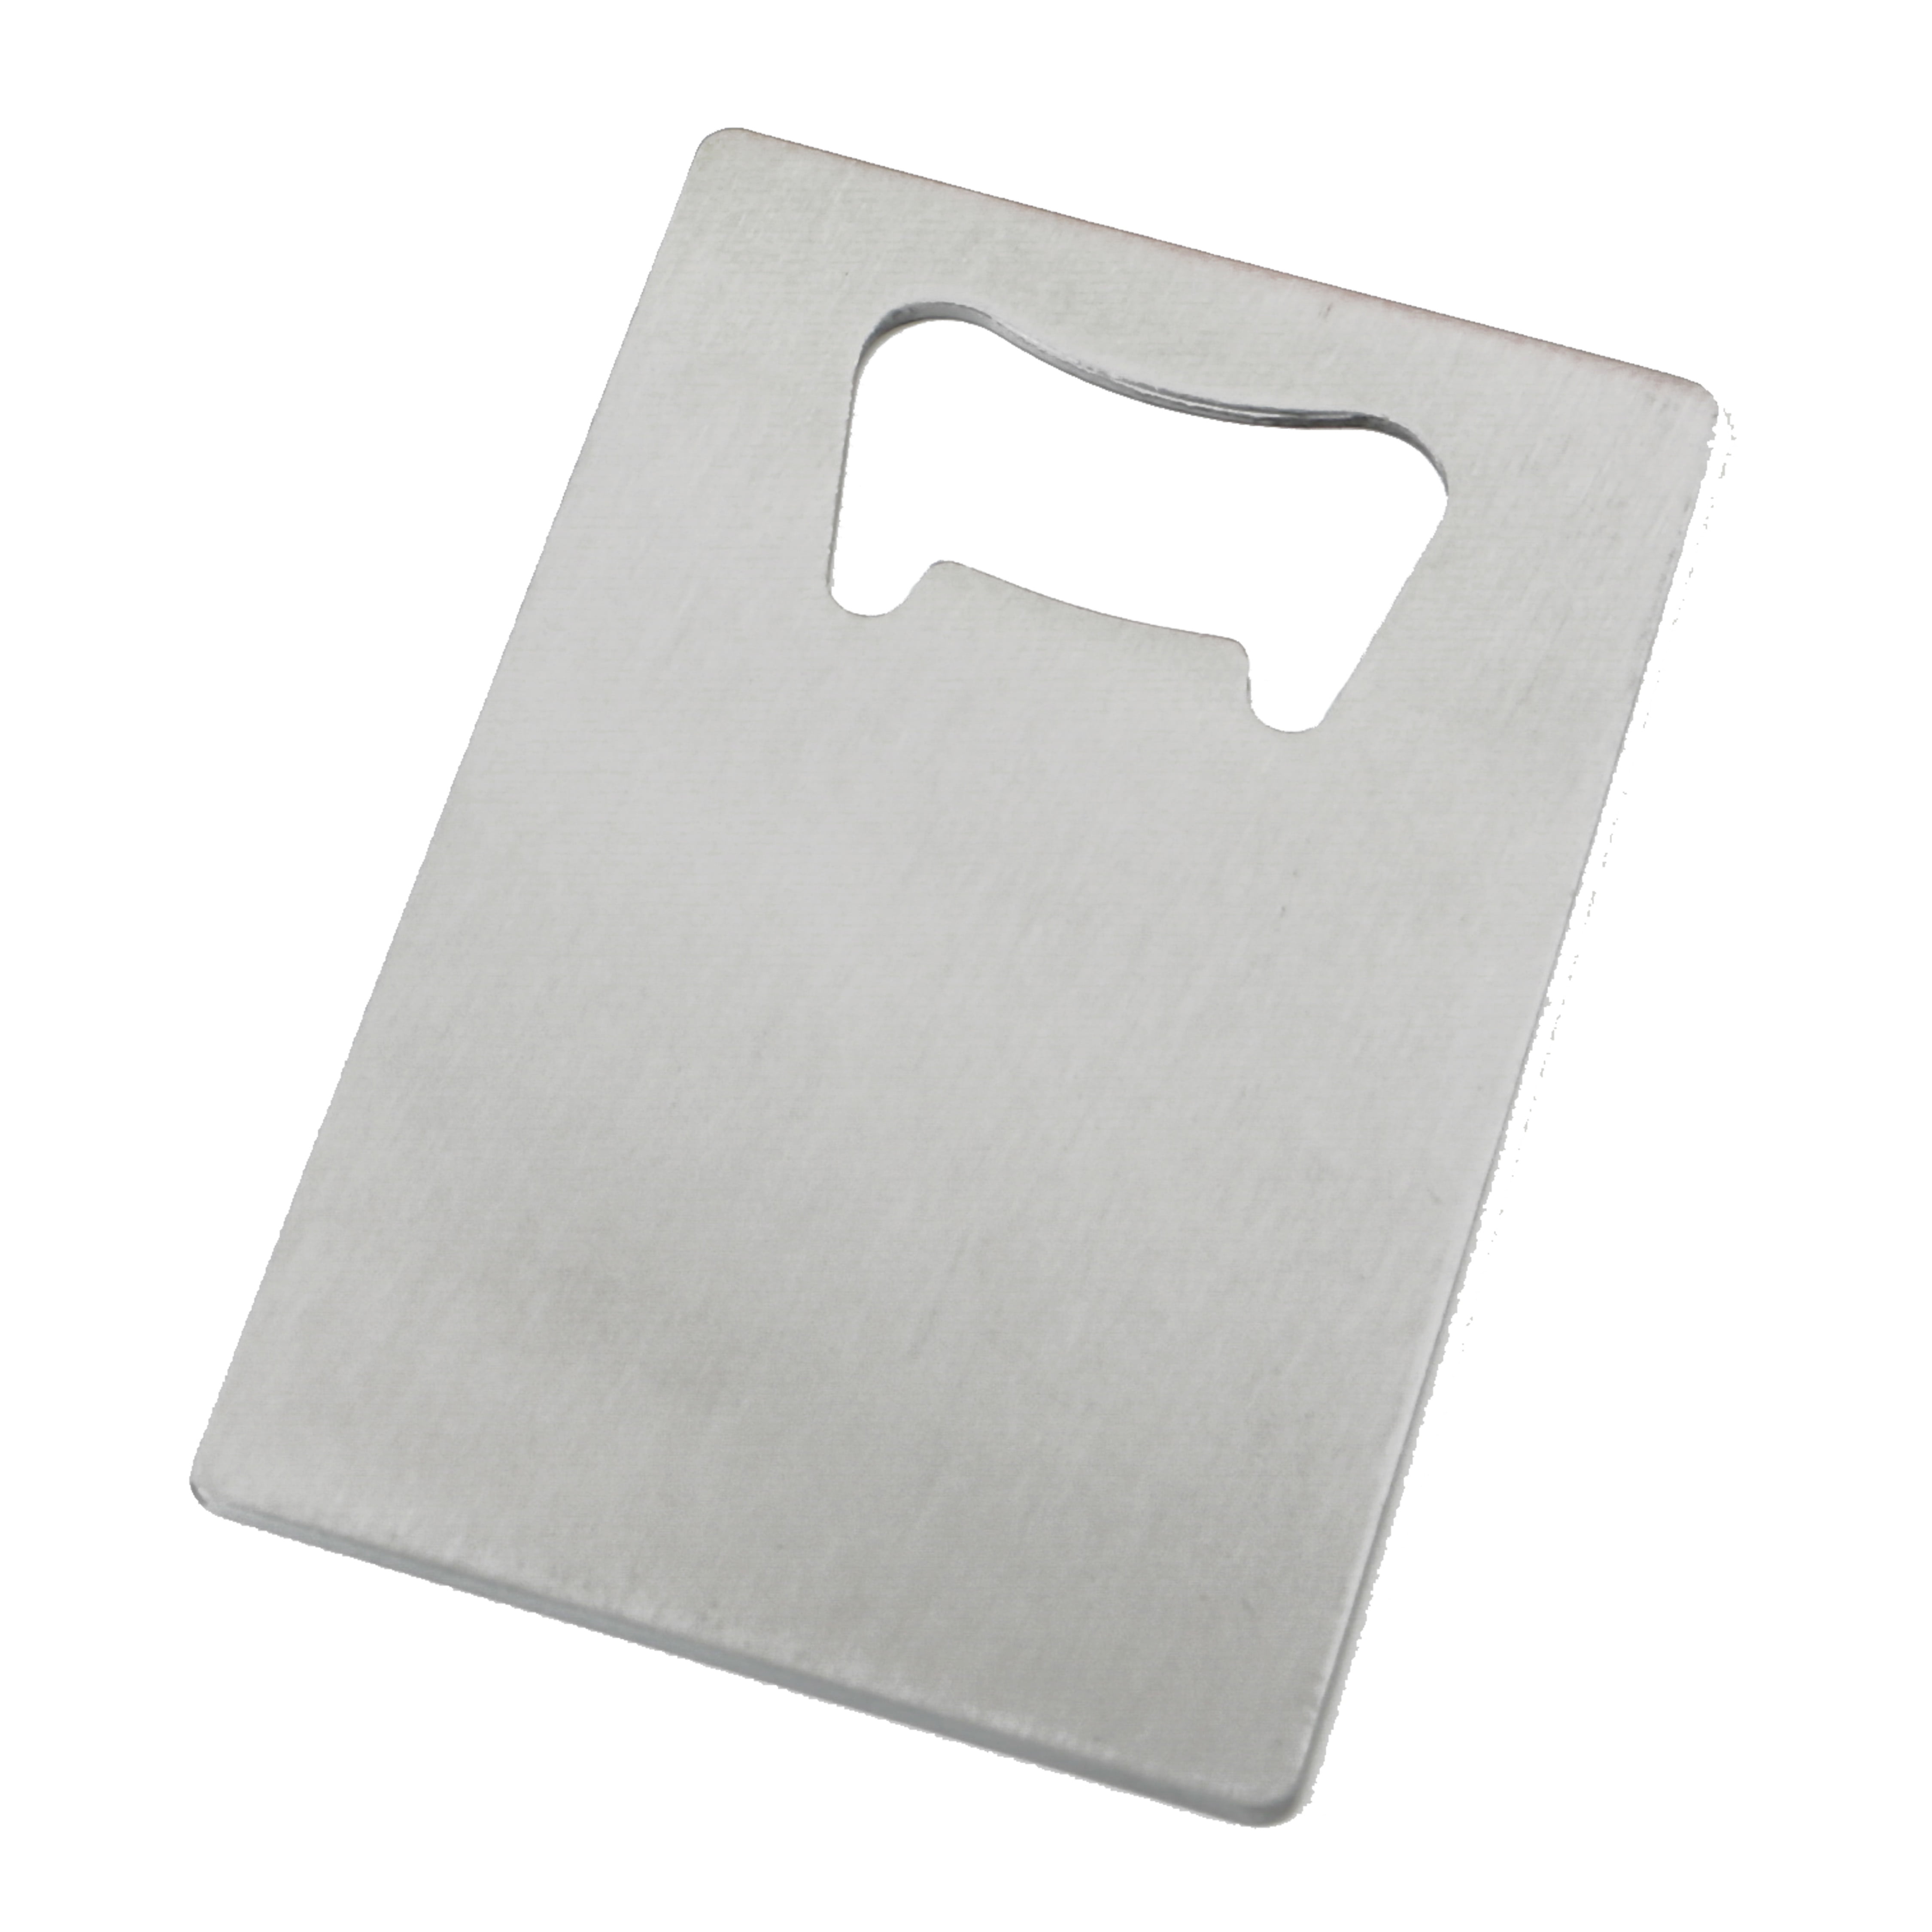 Stainless Steel BEER SODA Bottle Cap Opener Credit Card Size Bar Tool Gifts`H2 